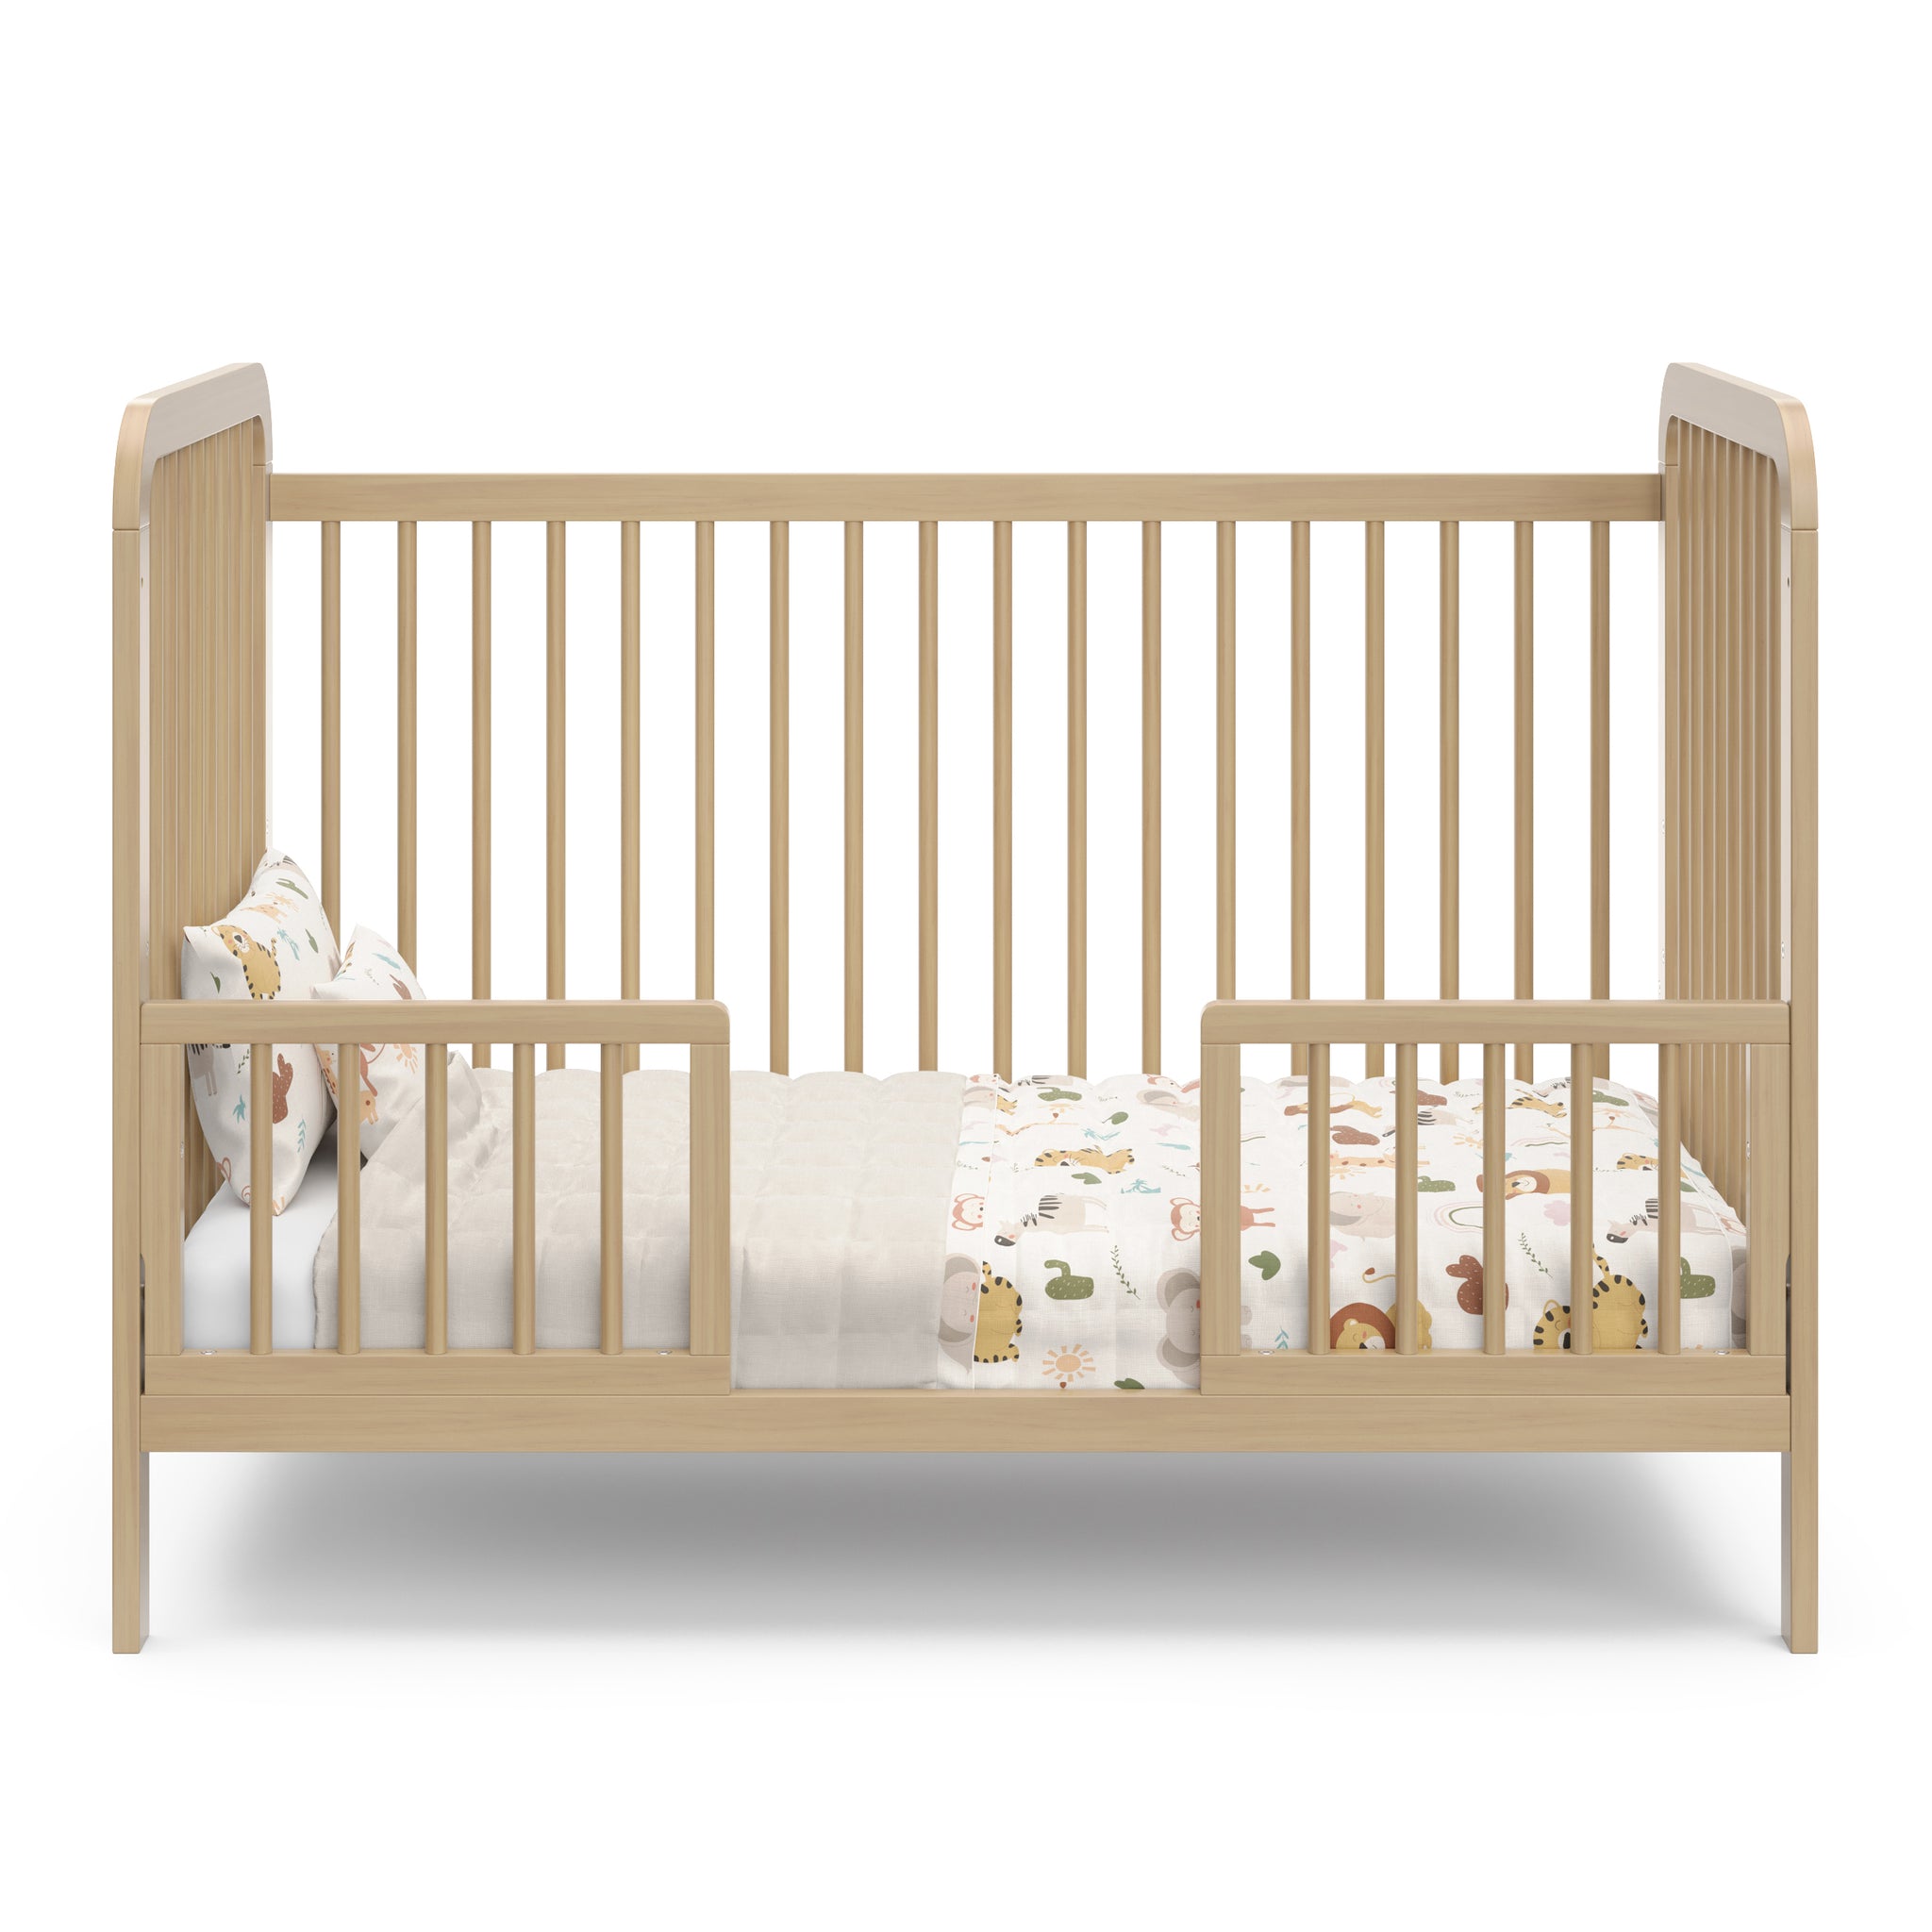 Driftwood crib in toddler bed conversion with two guardrails